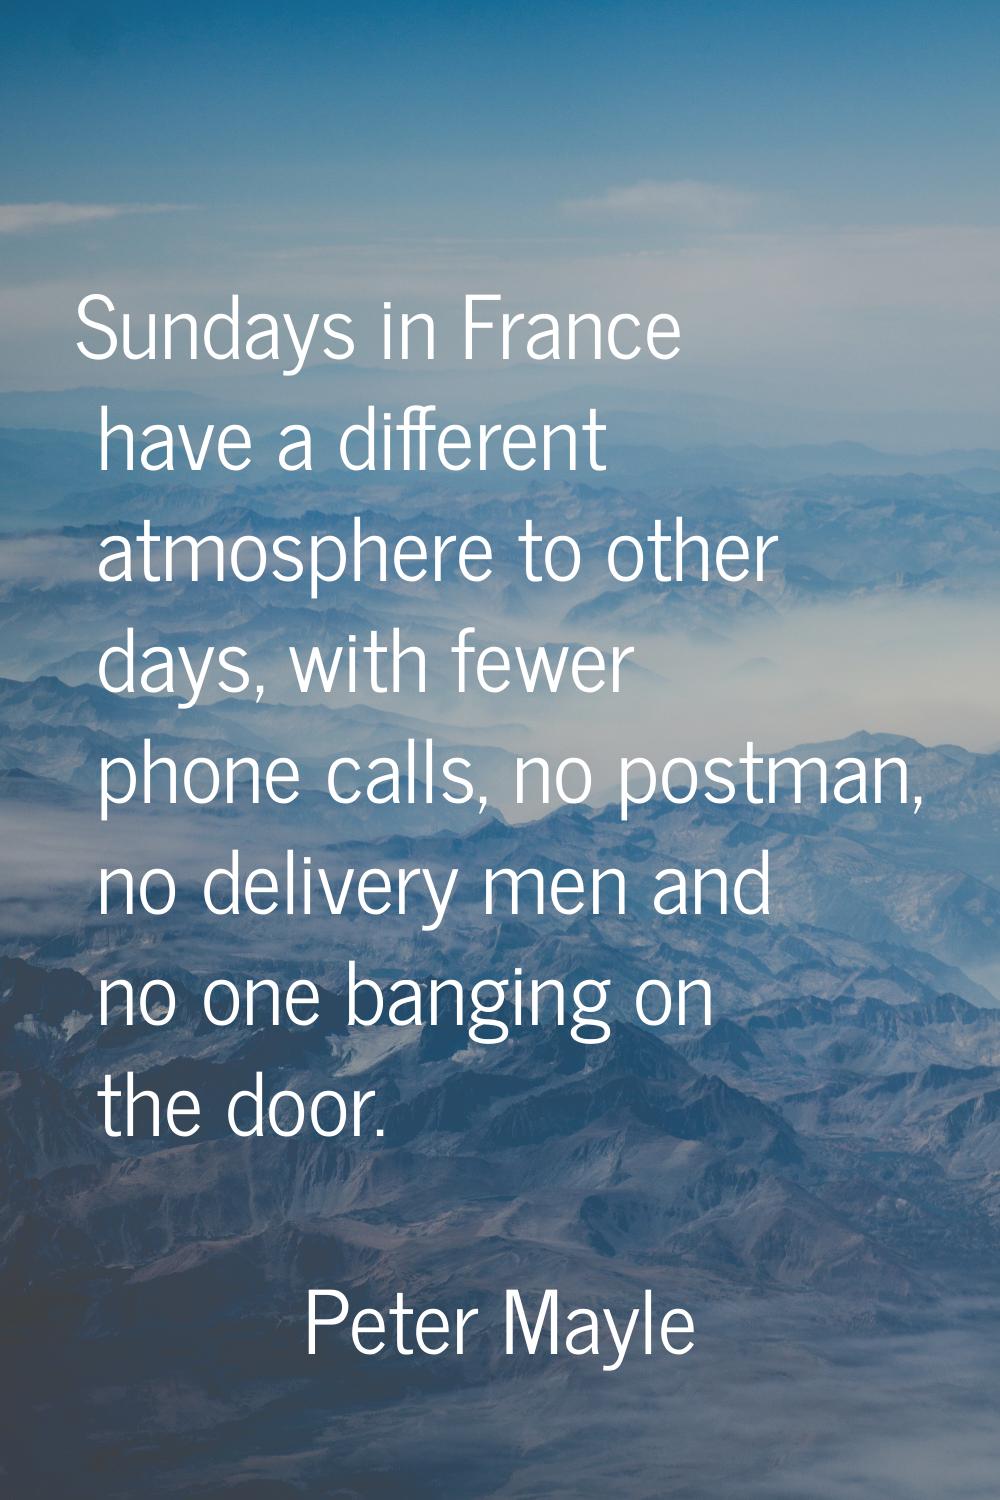 Sundays in France have a different atmosphere to other days, with fewer phone calls, no postman, no